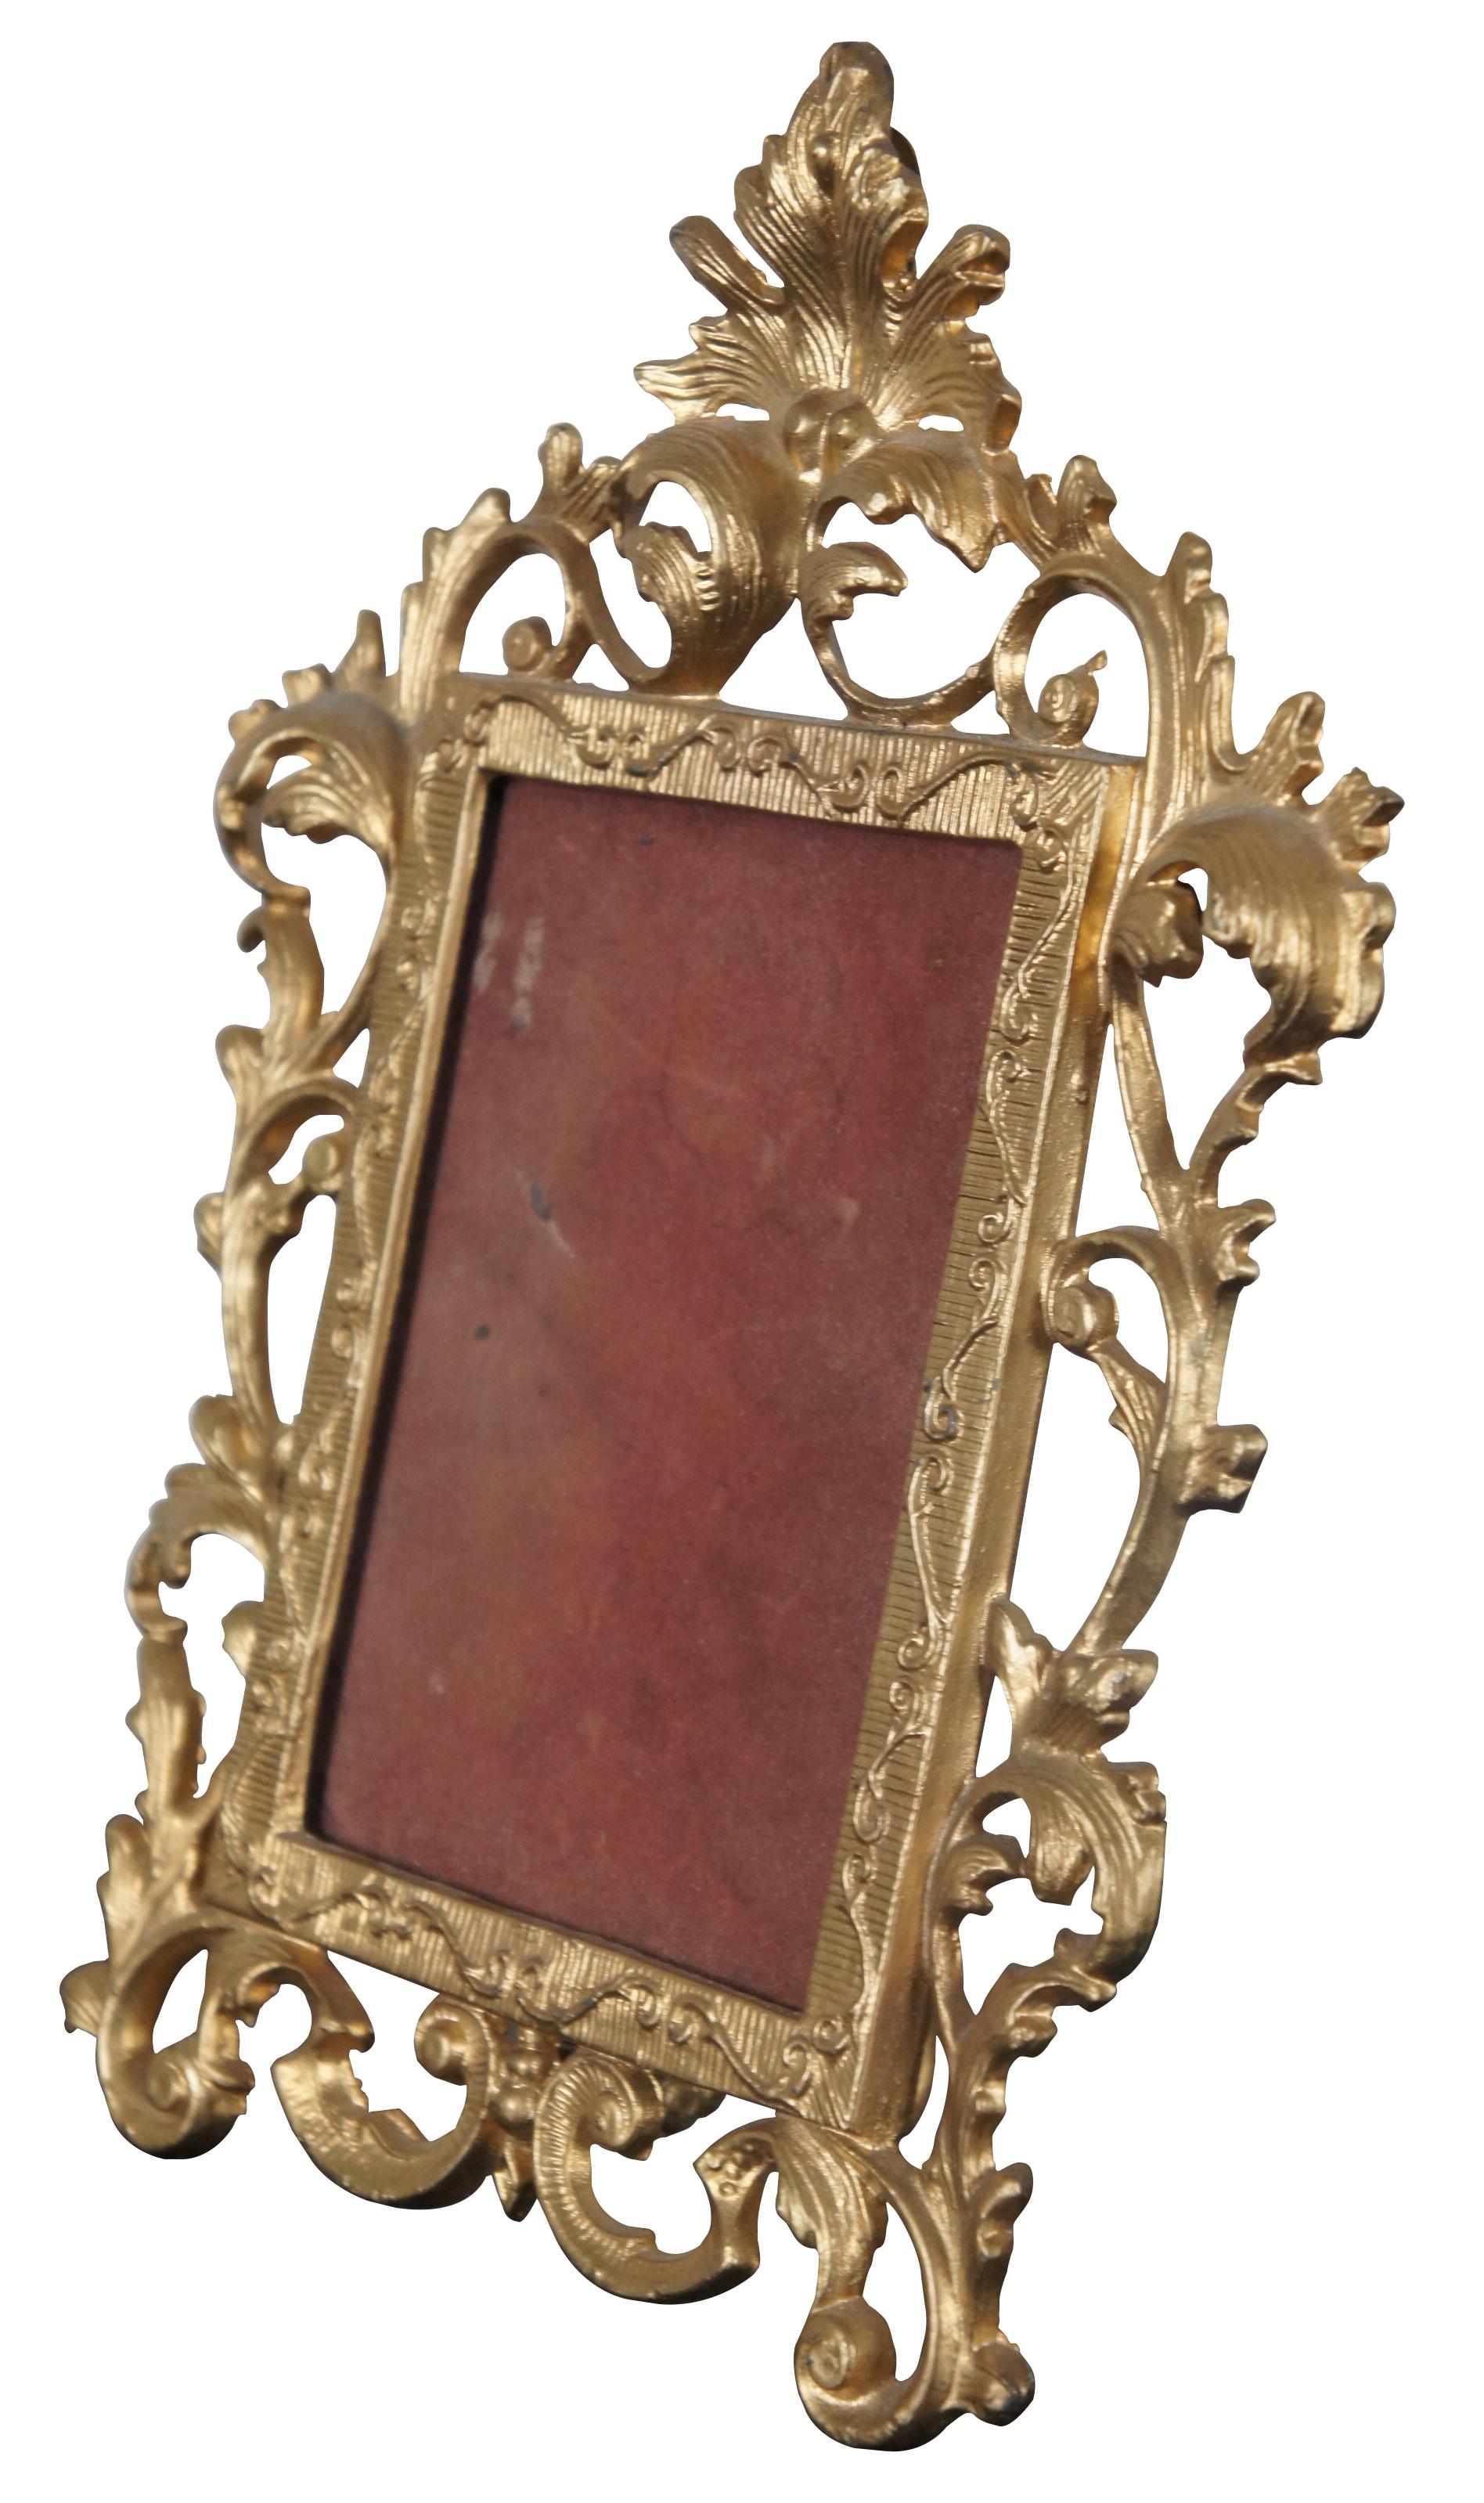 Antique gold painted cast iron picture or mirror frame styled with swirling Baroque leaves.

Measures: 8.5” x 3.75” x 11.75” / Opening - 4” x 6” (Width x Depth x Height).